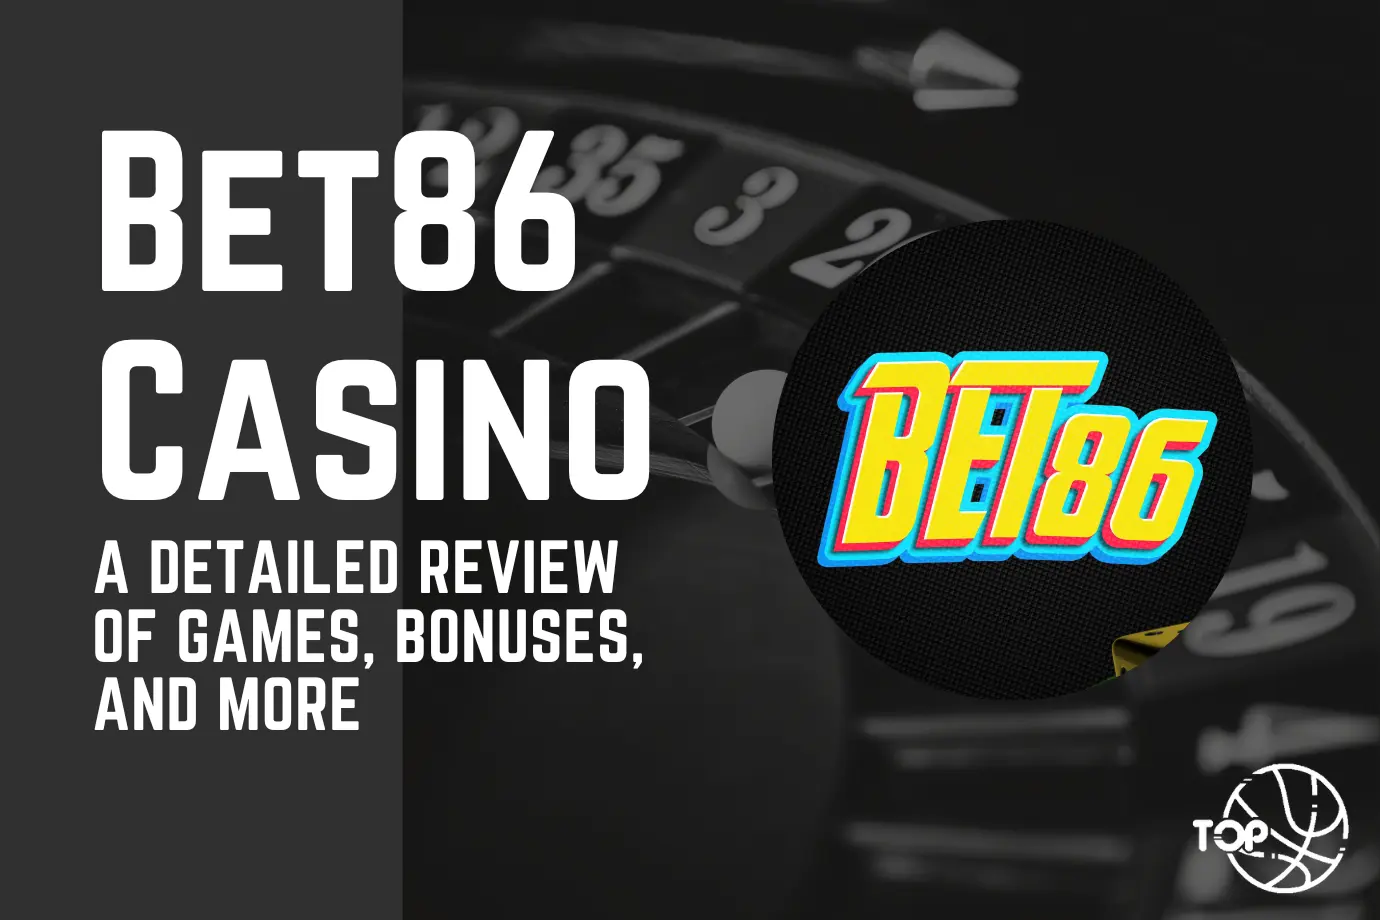 Bet86 Casino: A Detailed Review of Games, Bonuses, and More